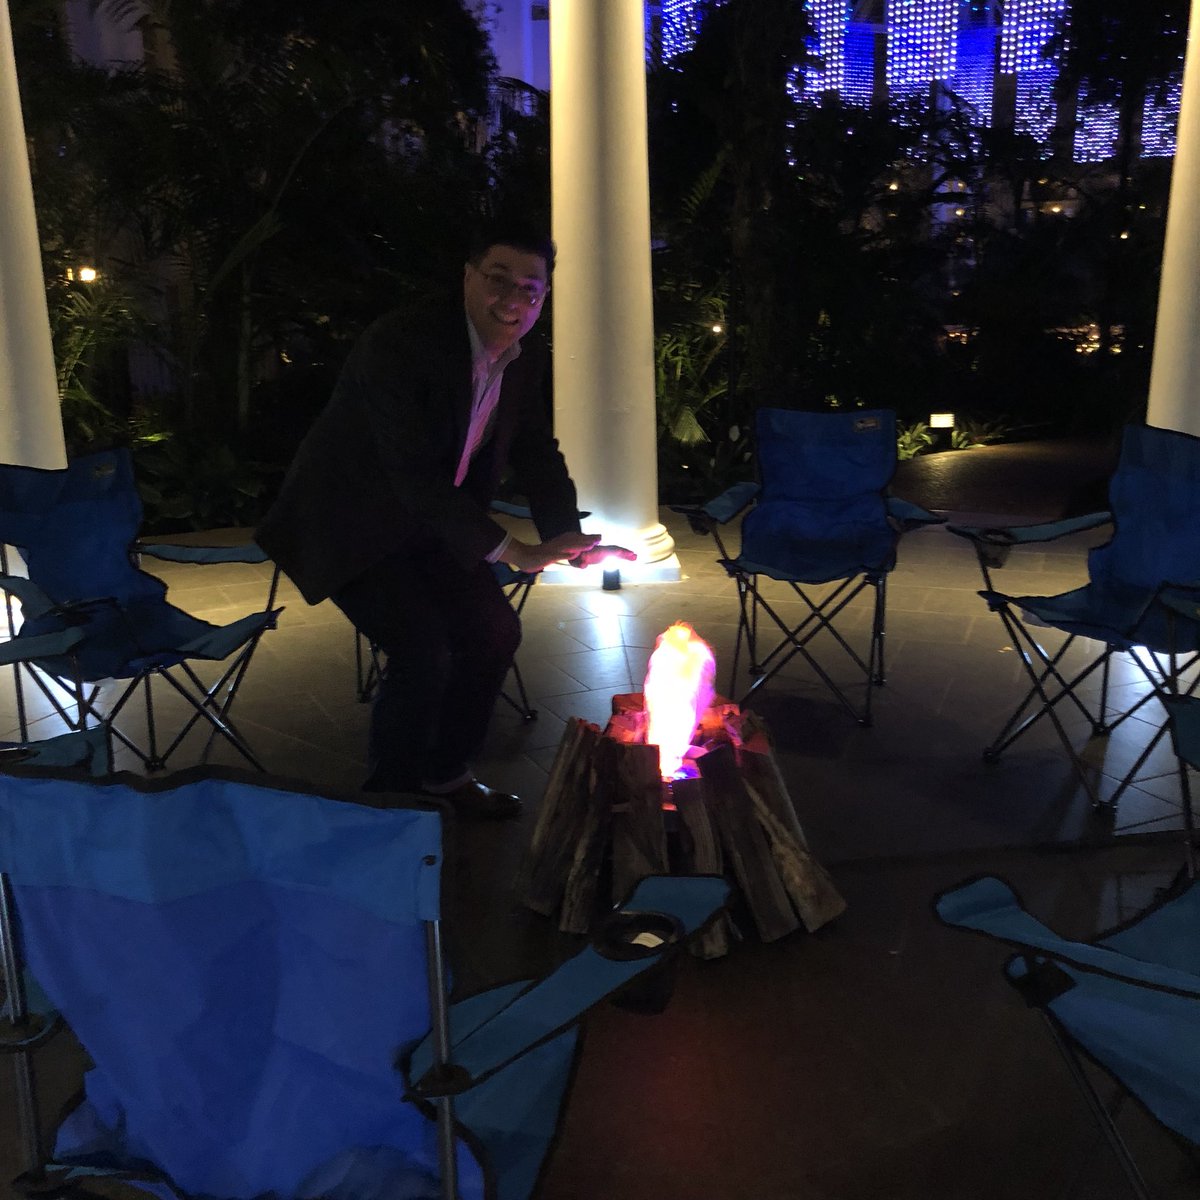 Warm up by the “fire” with conference chairs for the OLC Accelerate conference! #olcinnovate #campfirestories